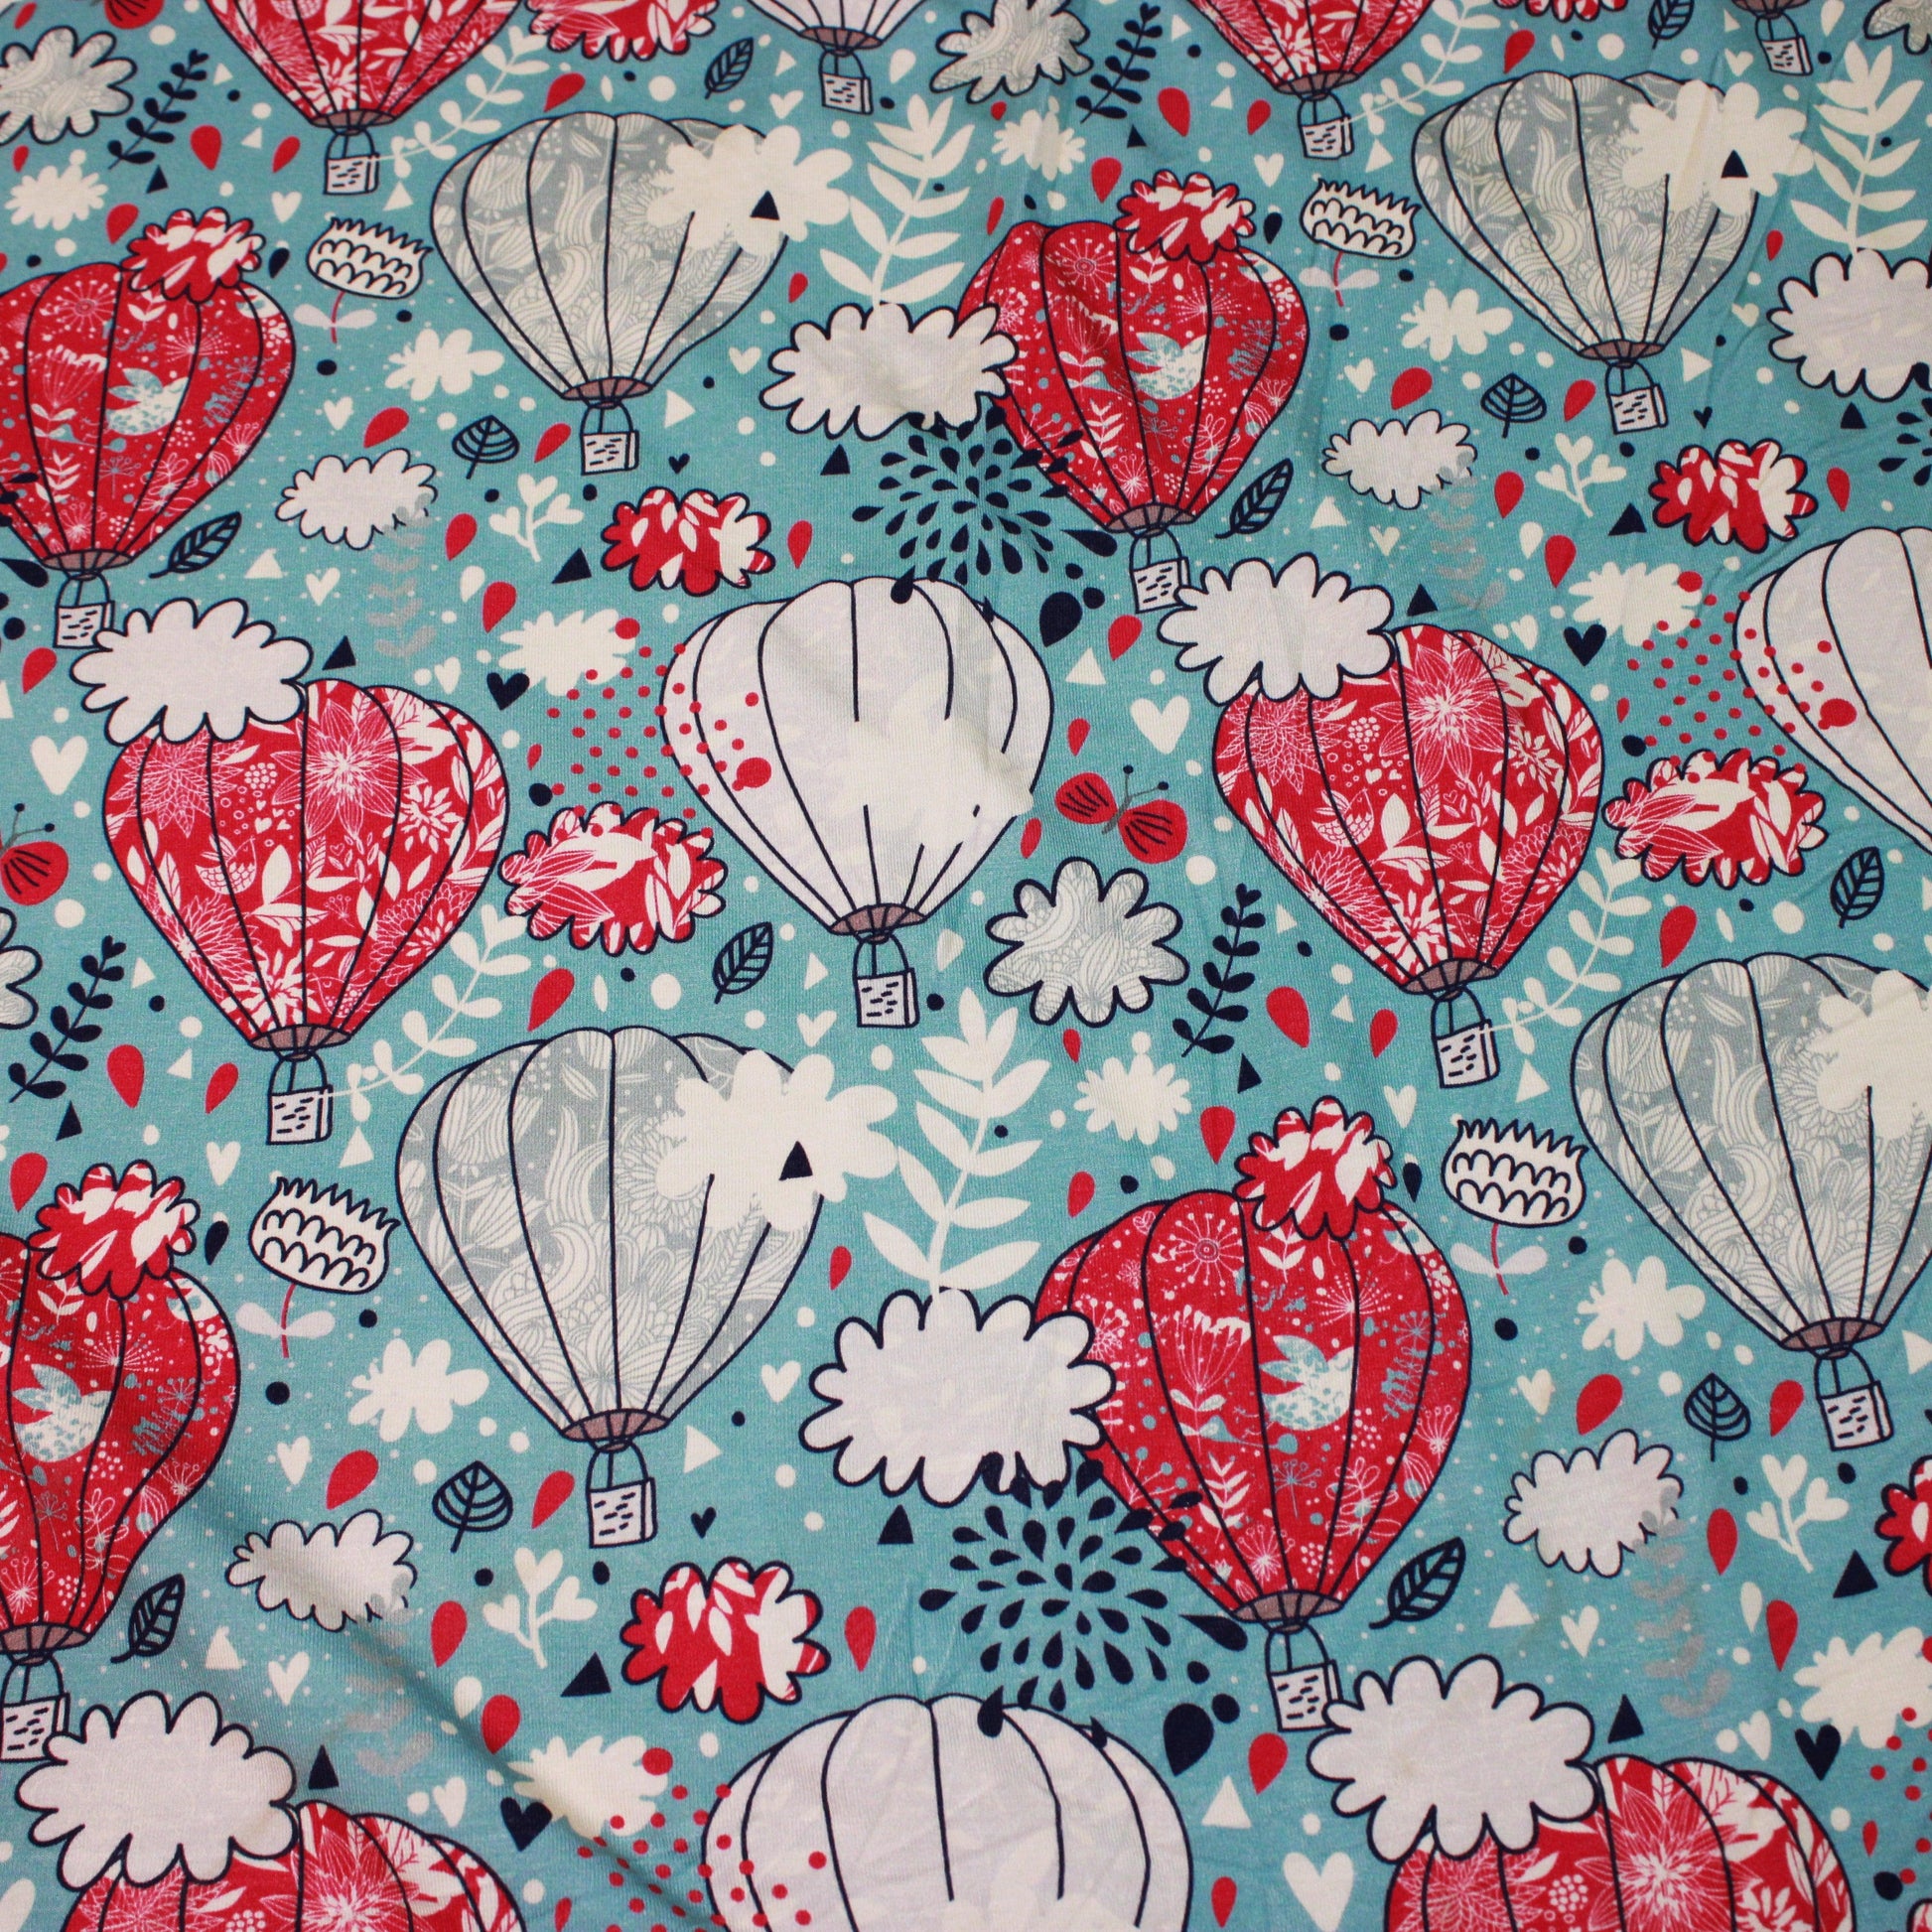 Sketched Hot Air Balloons on Bamboo/Spandex Jersey Fabric - Nature's Fabrics